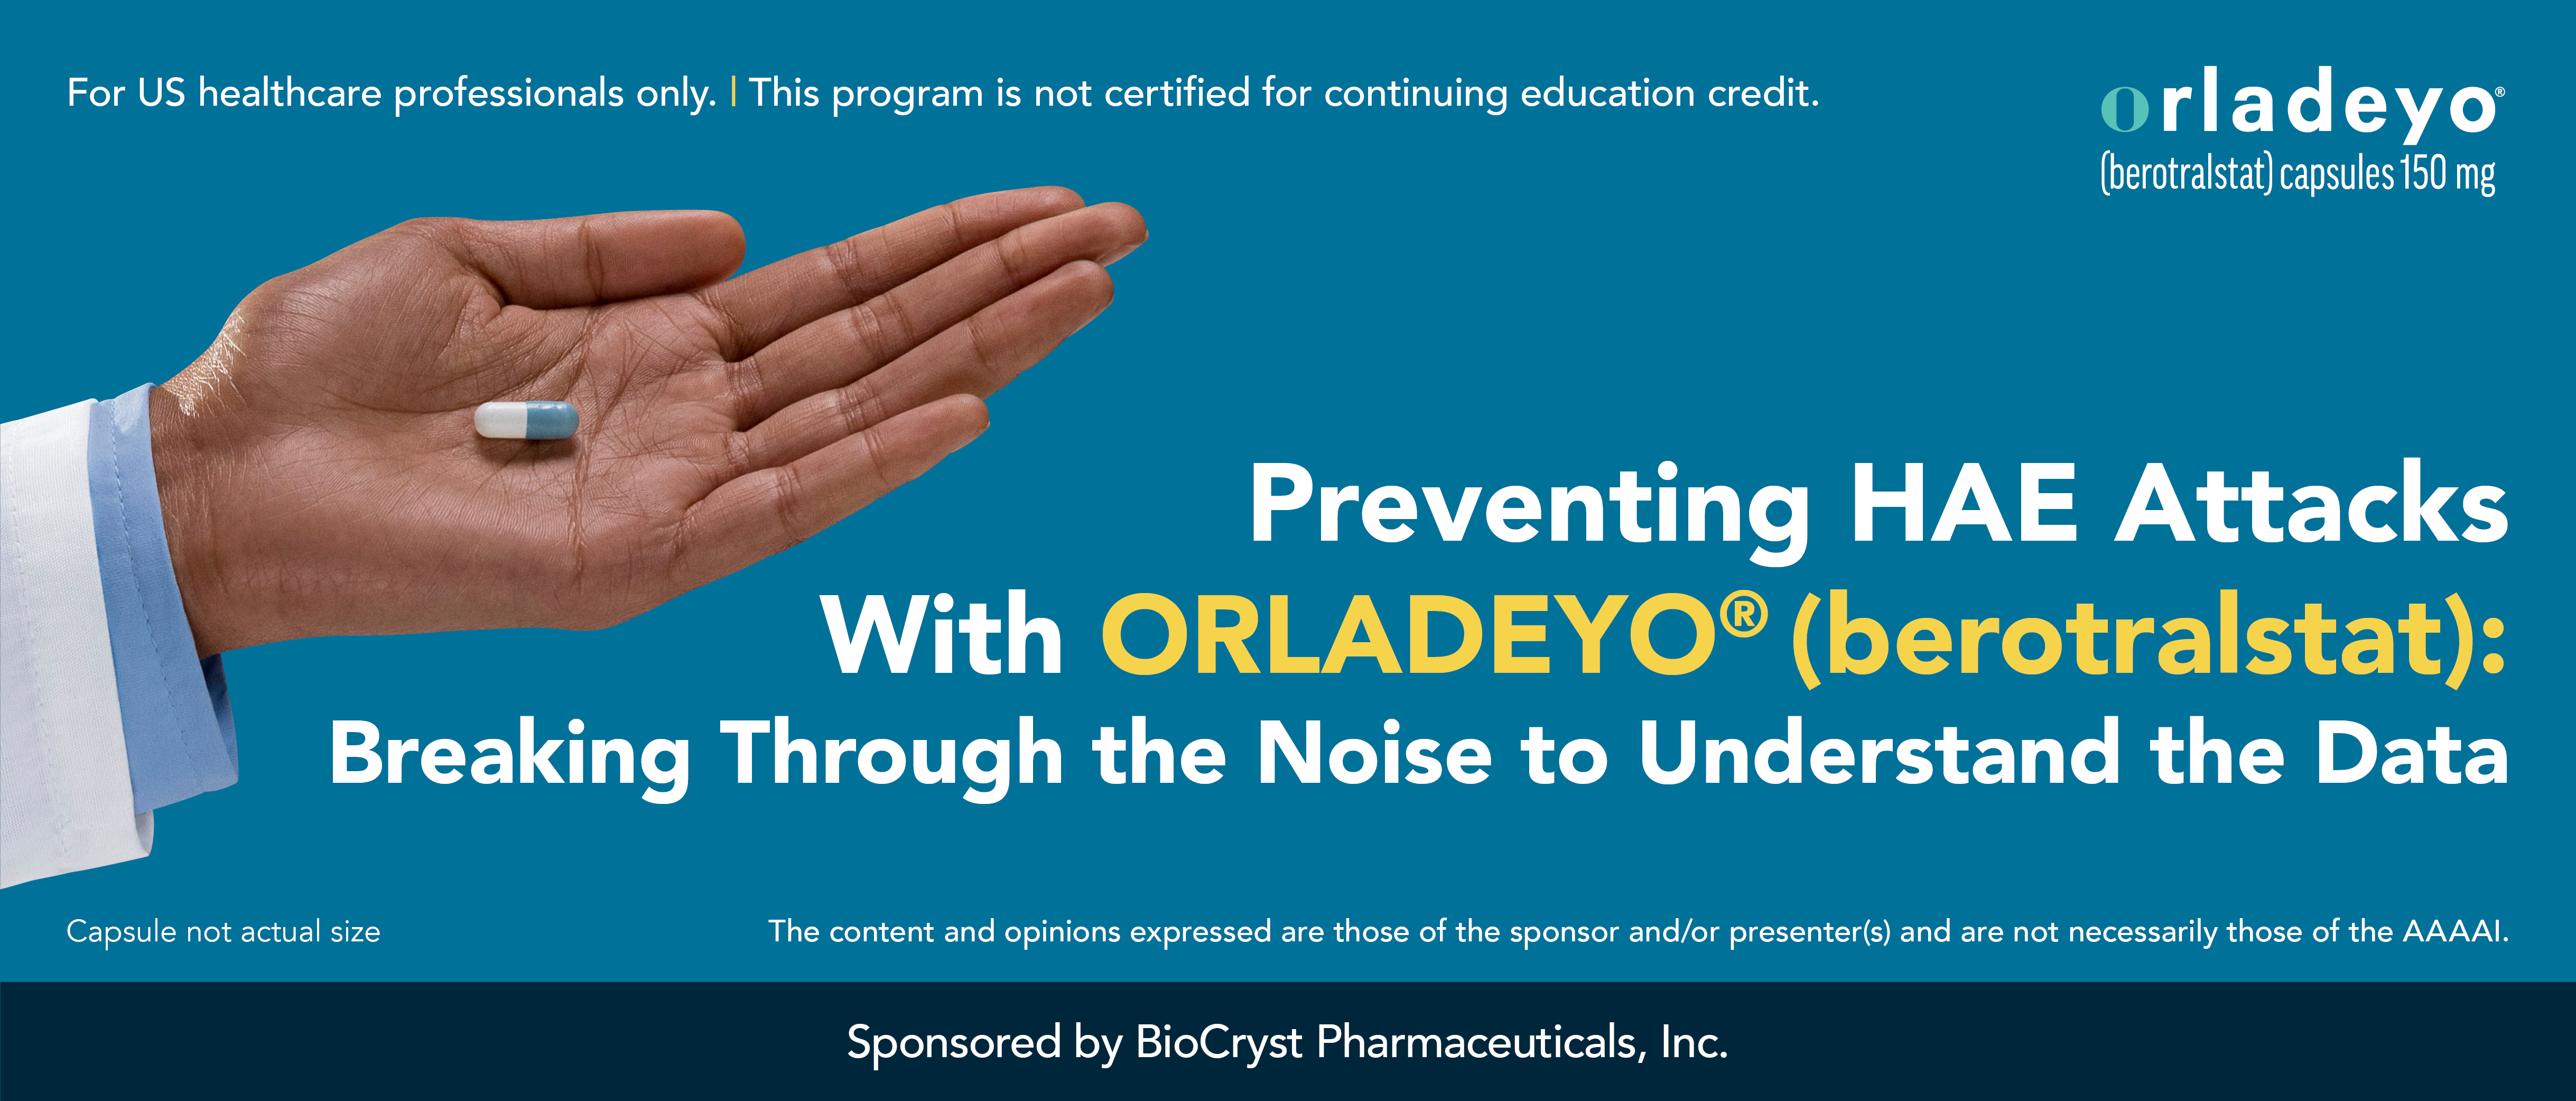 Preventing HAE attacks with ORLADEYO: Breaking through the noise to understand the data.